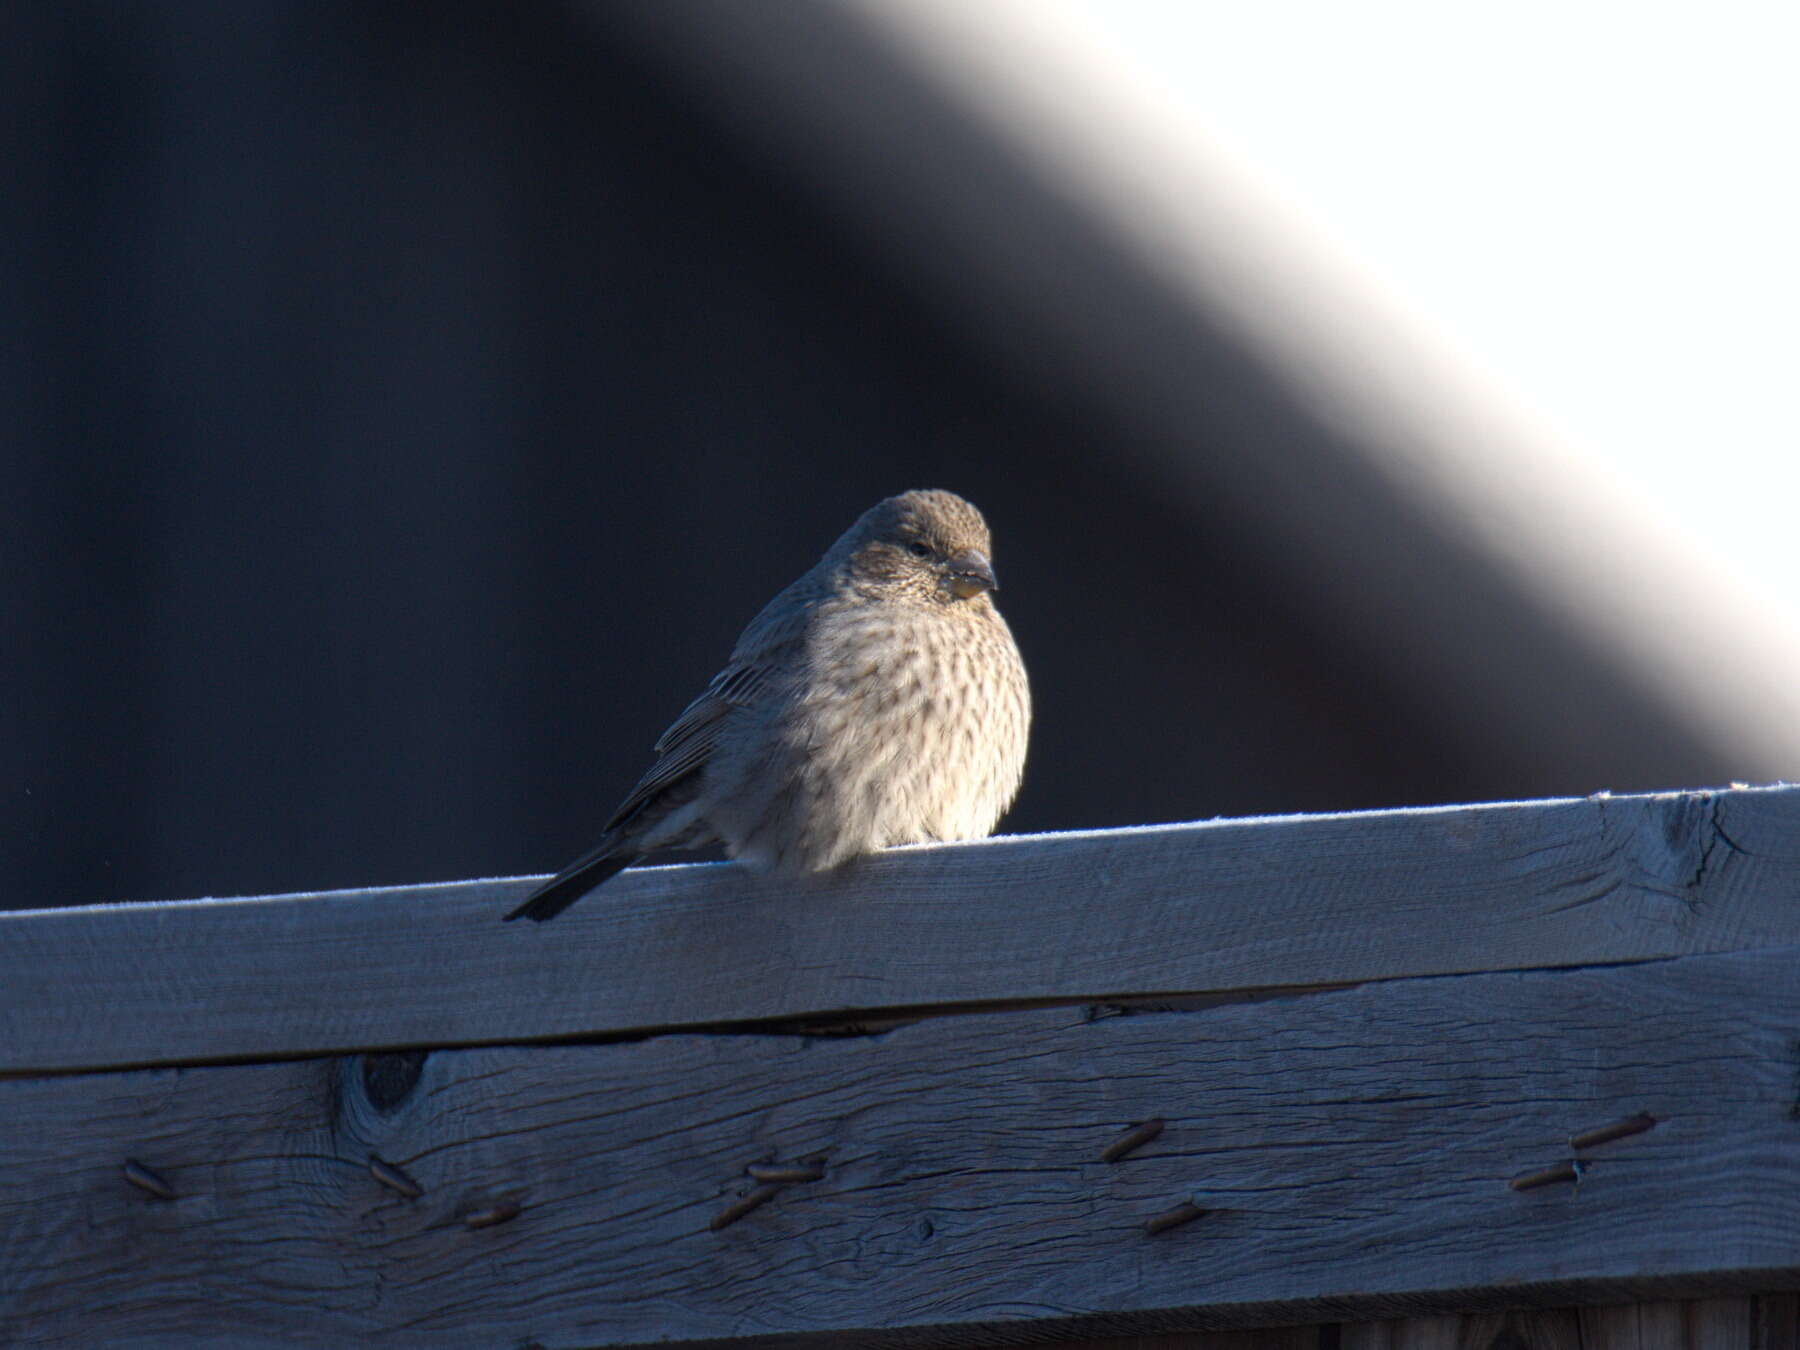 Image of Great Rosefinch